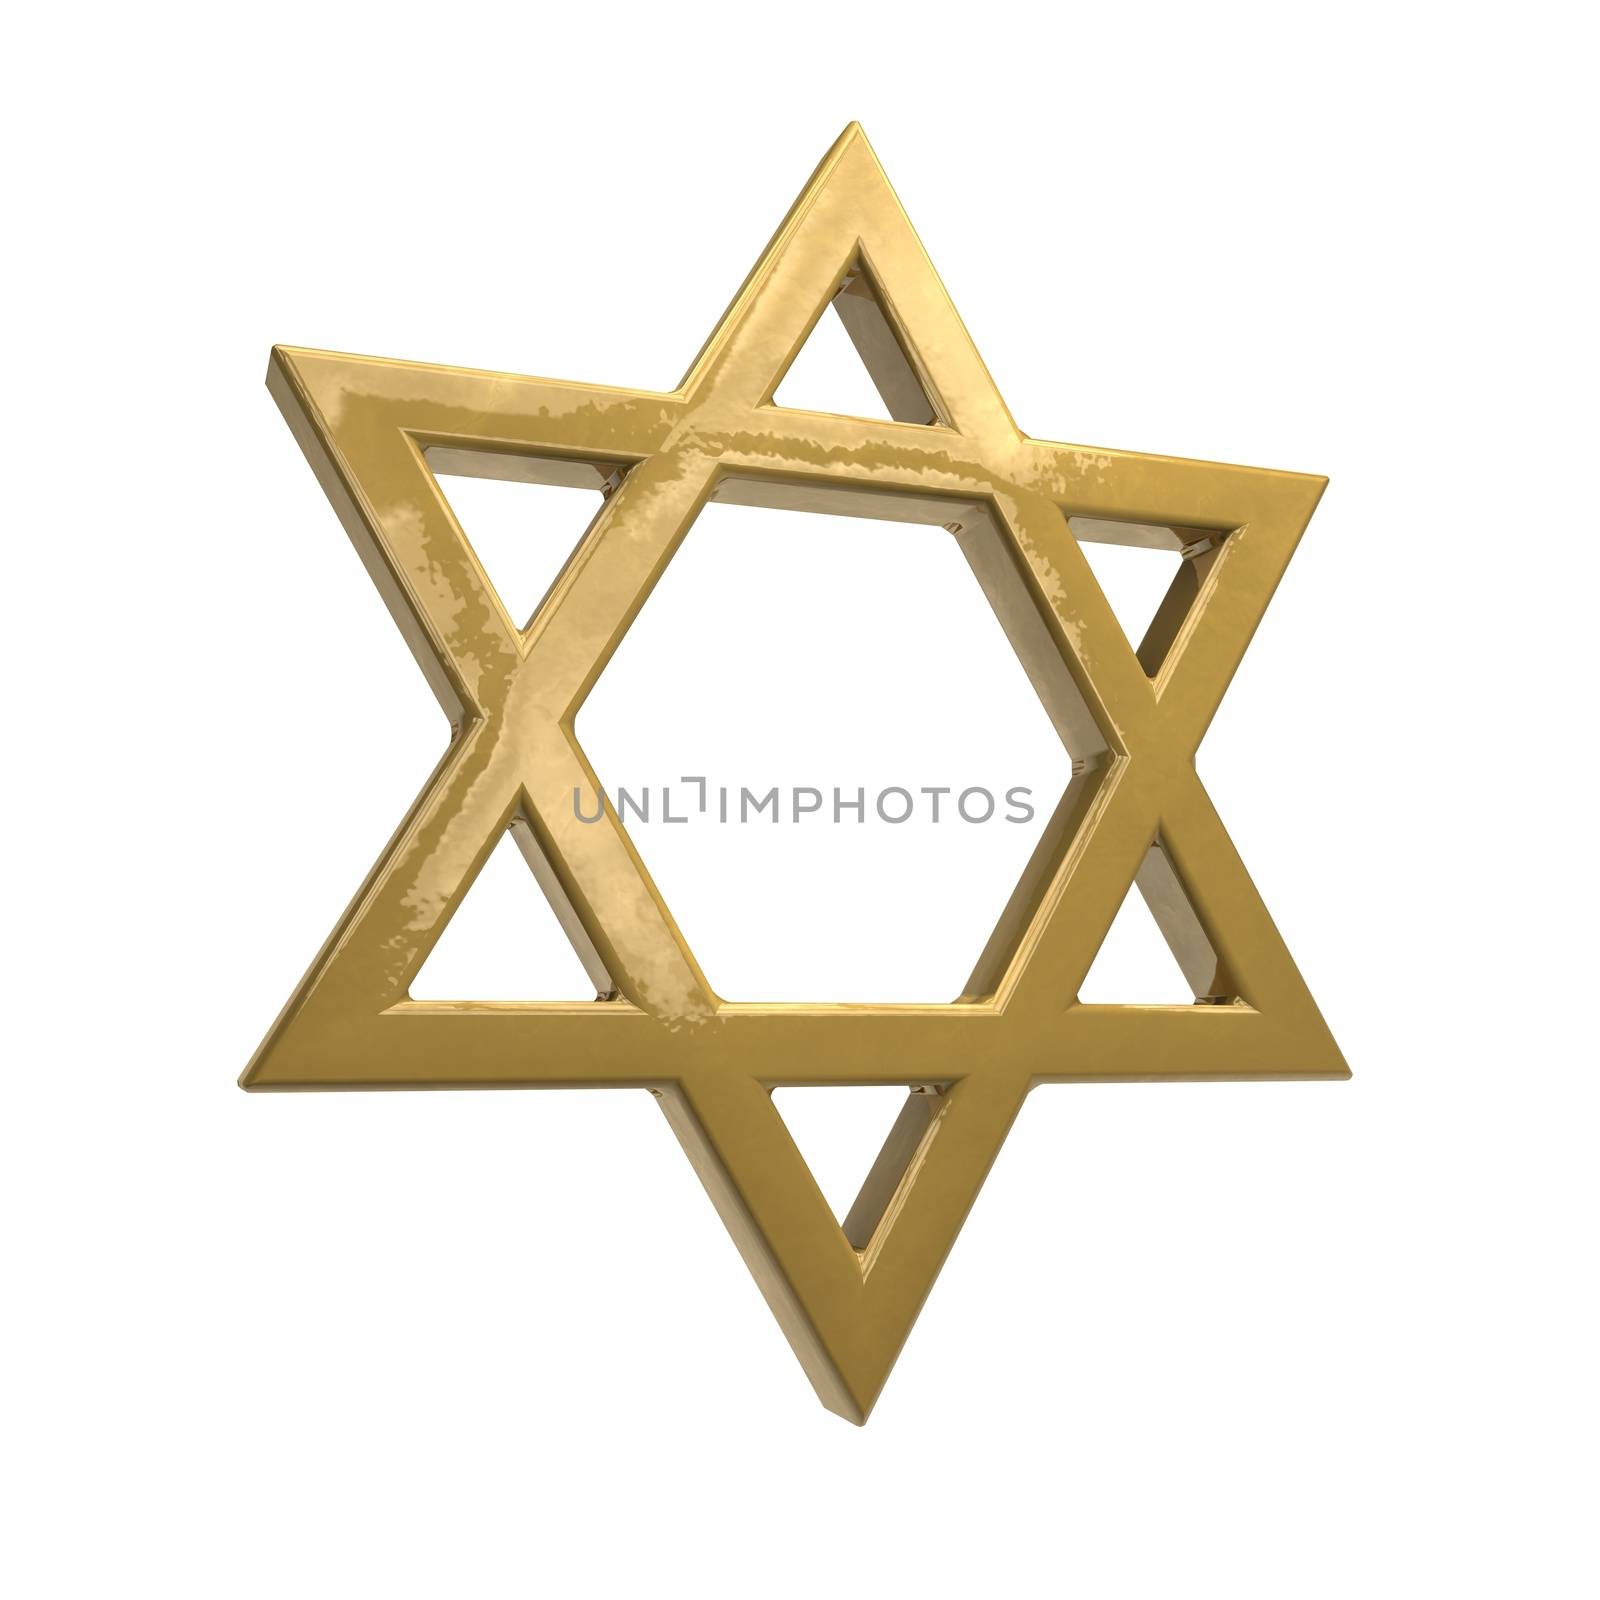 The star of david is a Jewish sign.